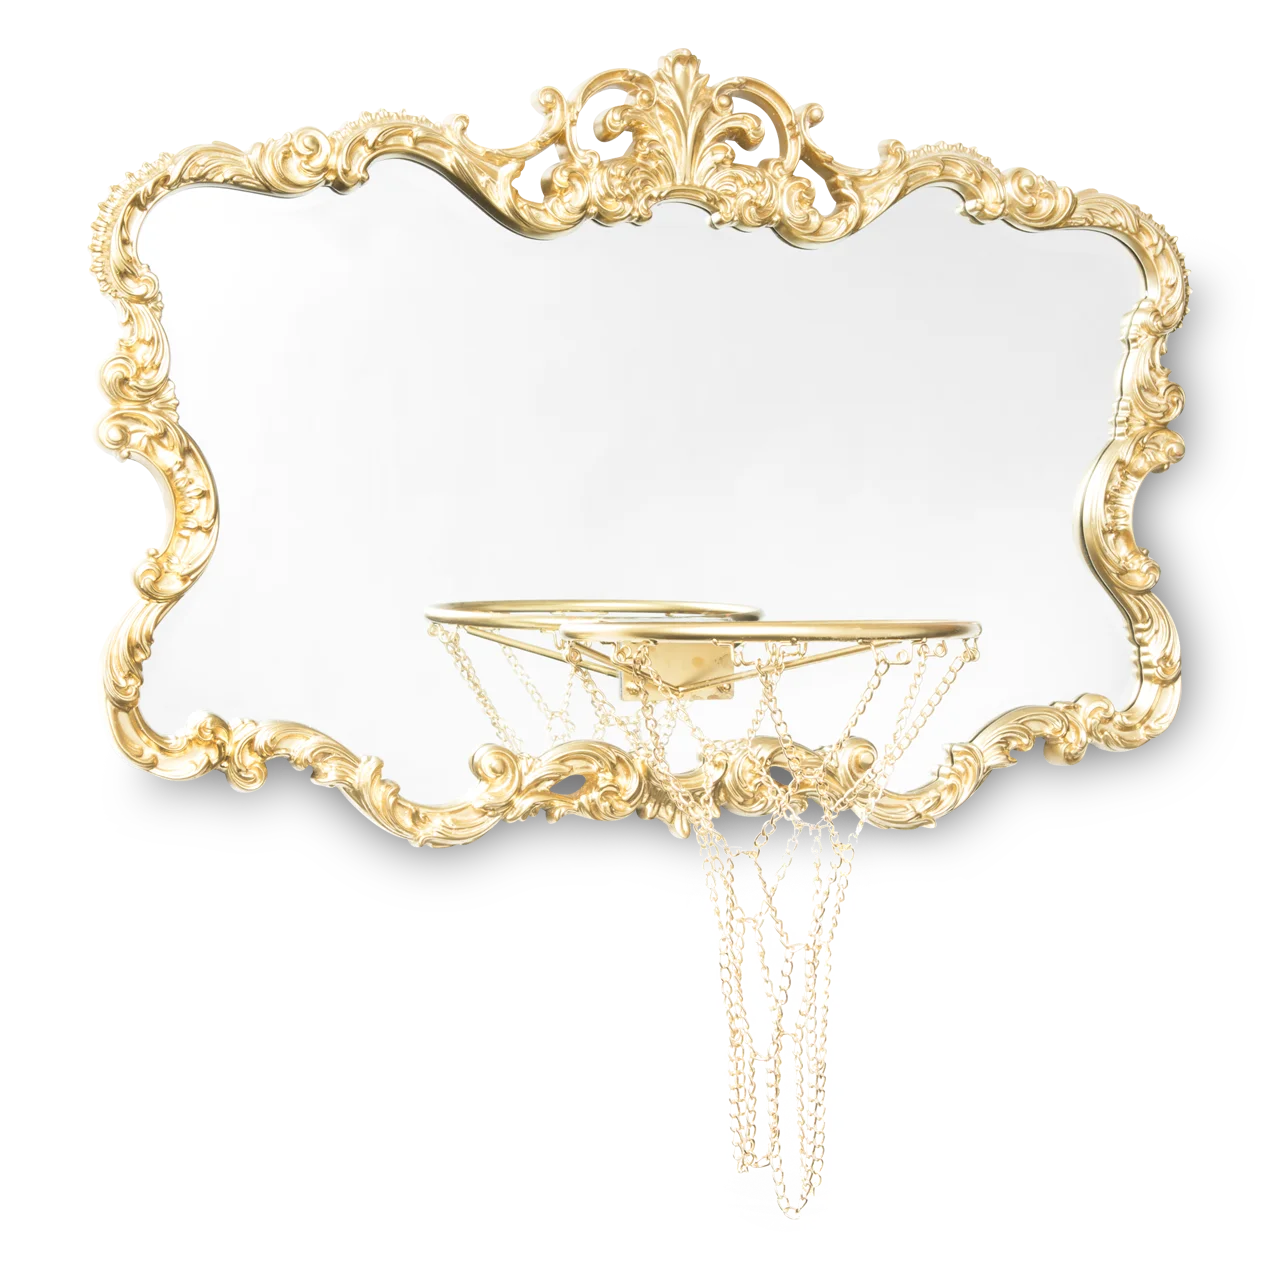 A basketball hoop attached to a golden mirror ring.